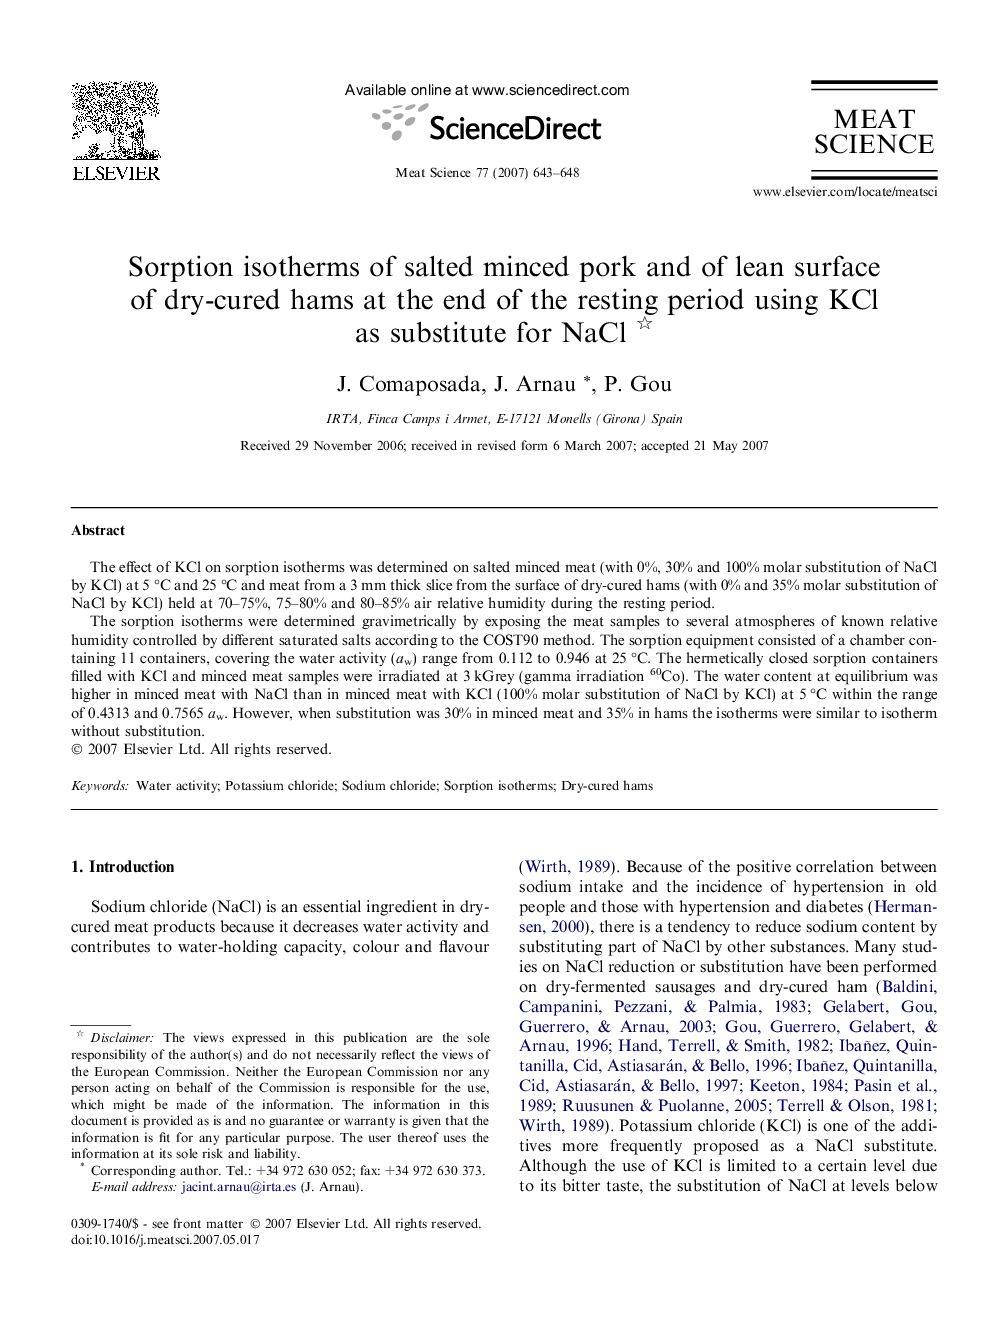 Sorption isotherms of salted minced pork and of lean surface of dry-cured hams at the end of the resting period using KCl as substitute for NaCl 